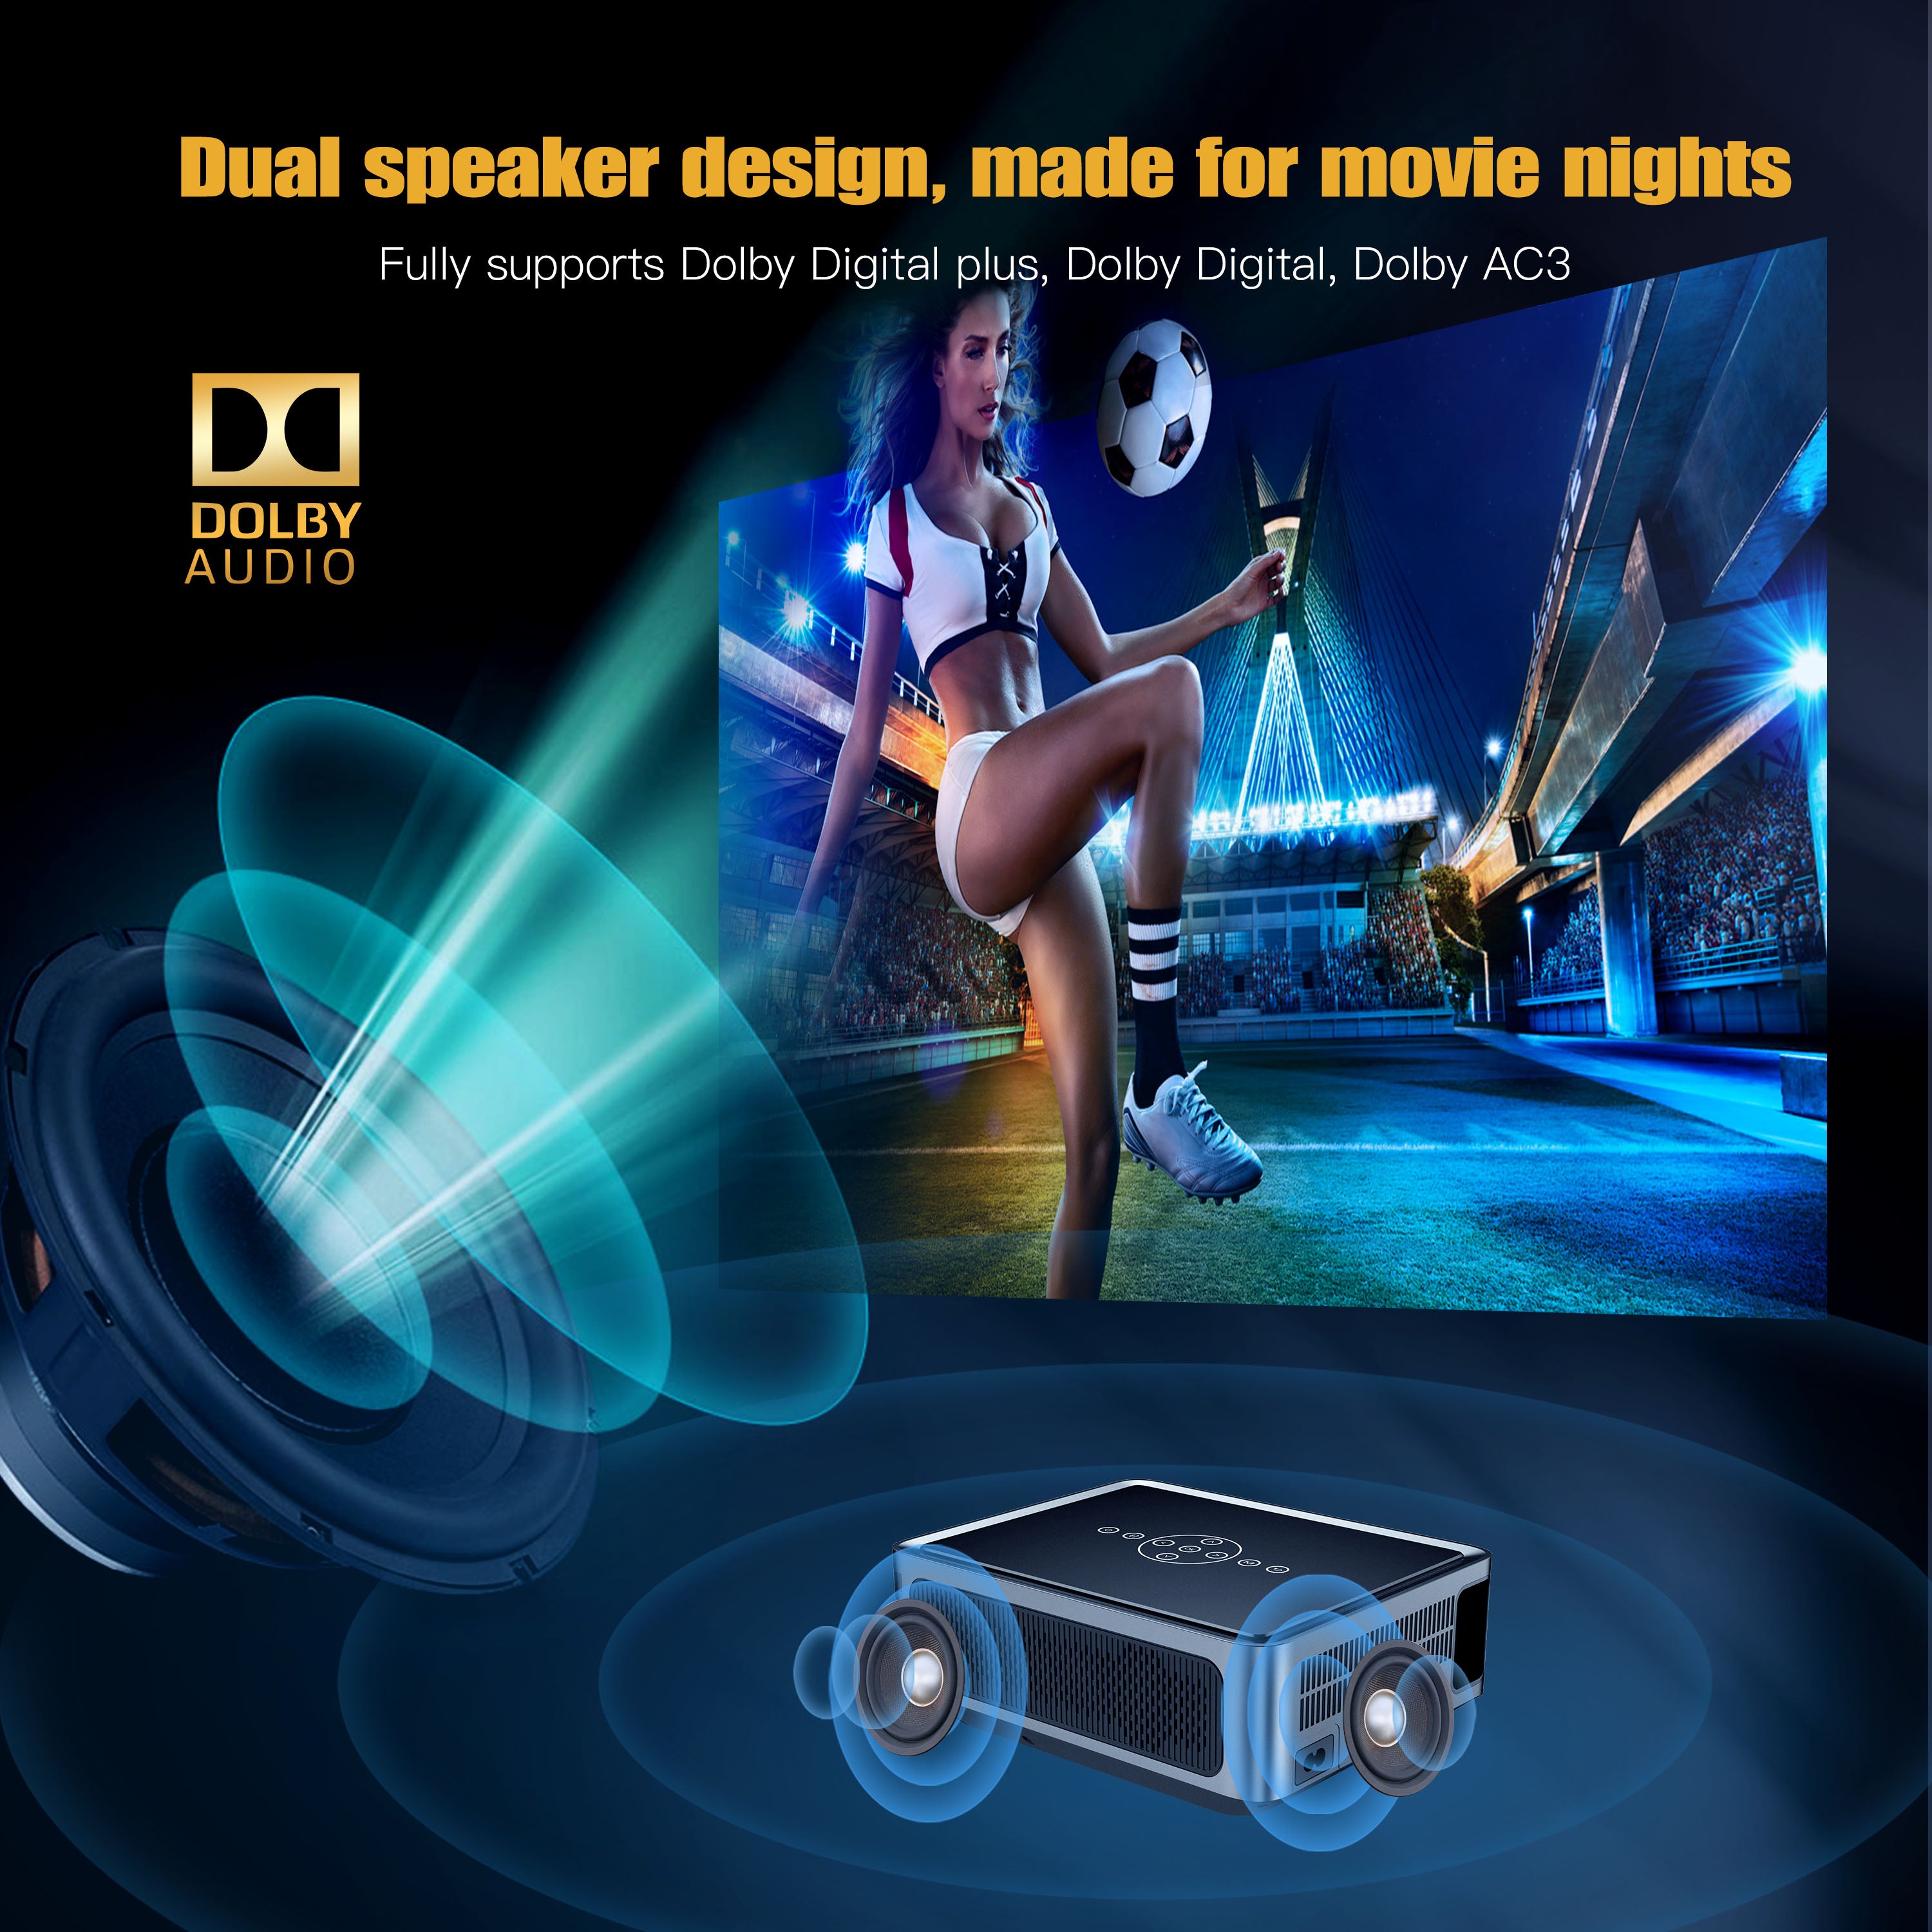 Android Led Auto Focus Projector with 4K 8K Support & Dolby Audio